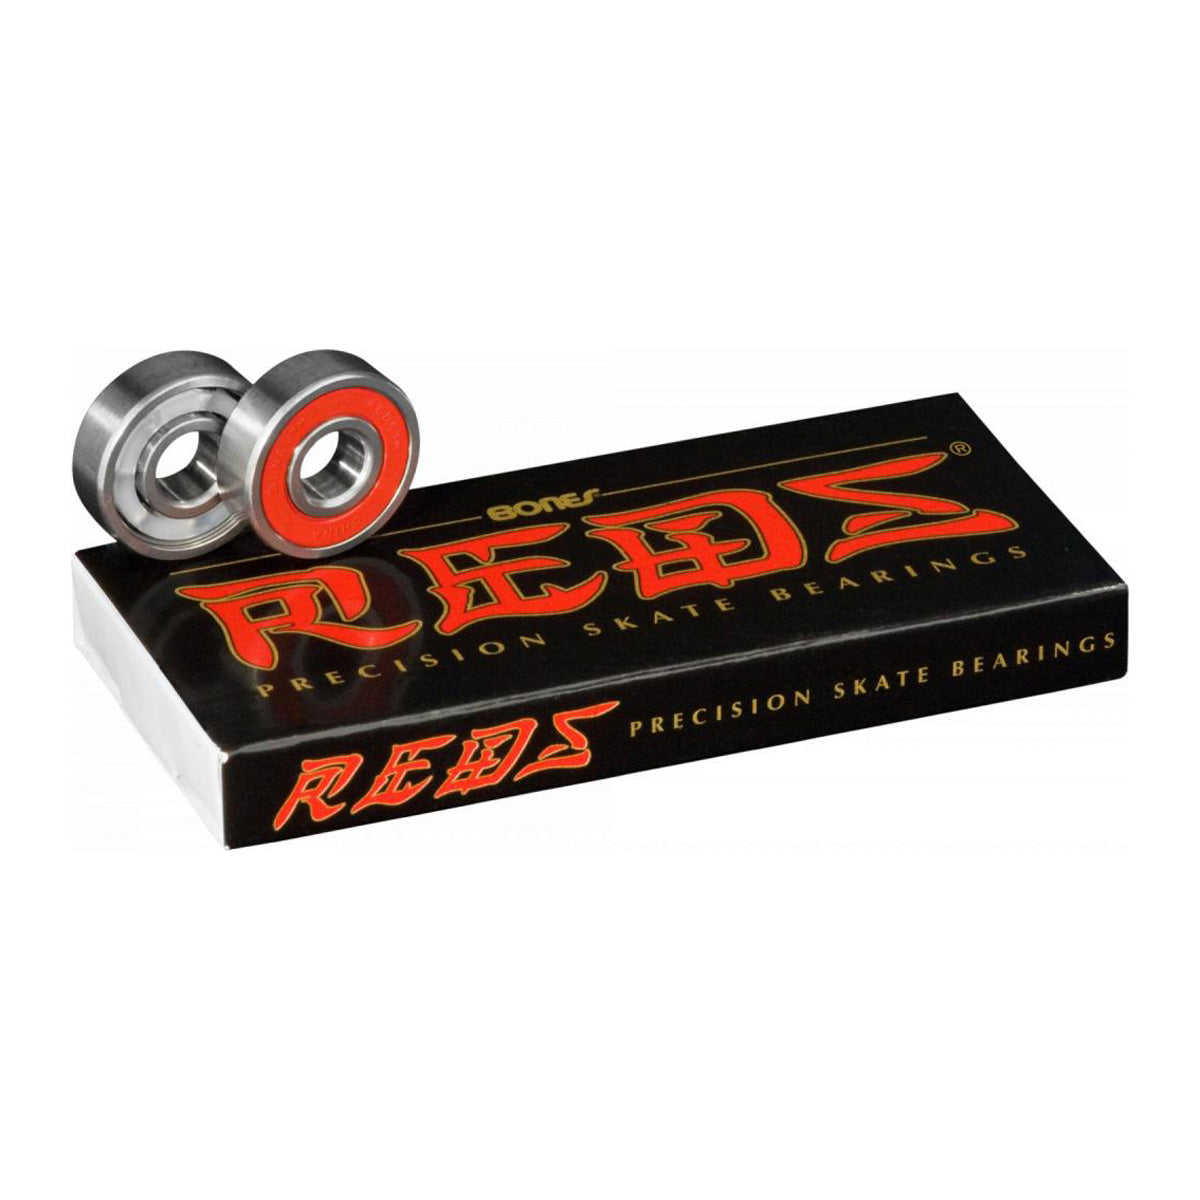 set of 8 classic skateboard bearings from reds